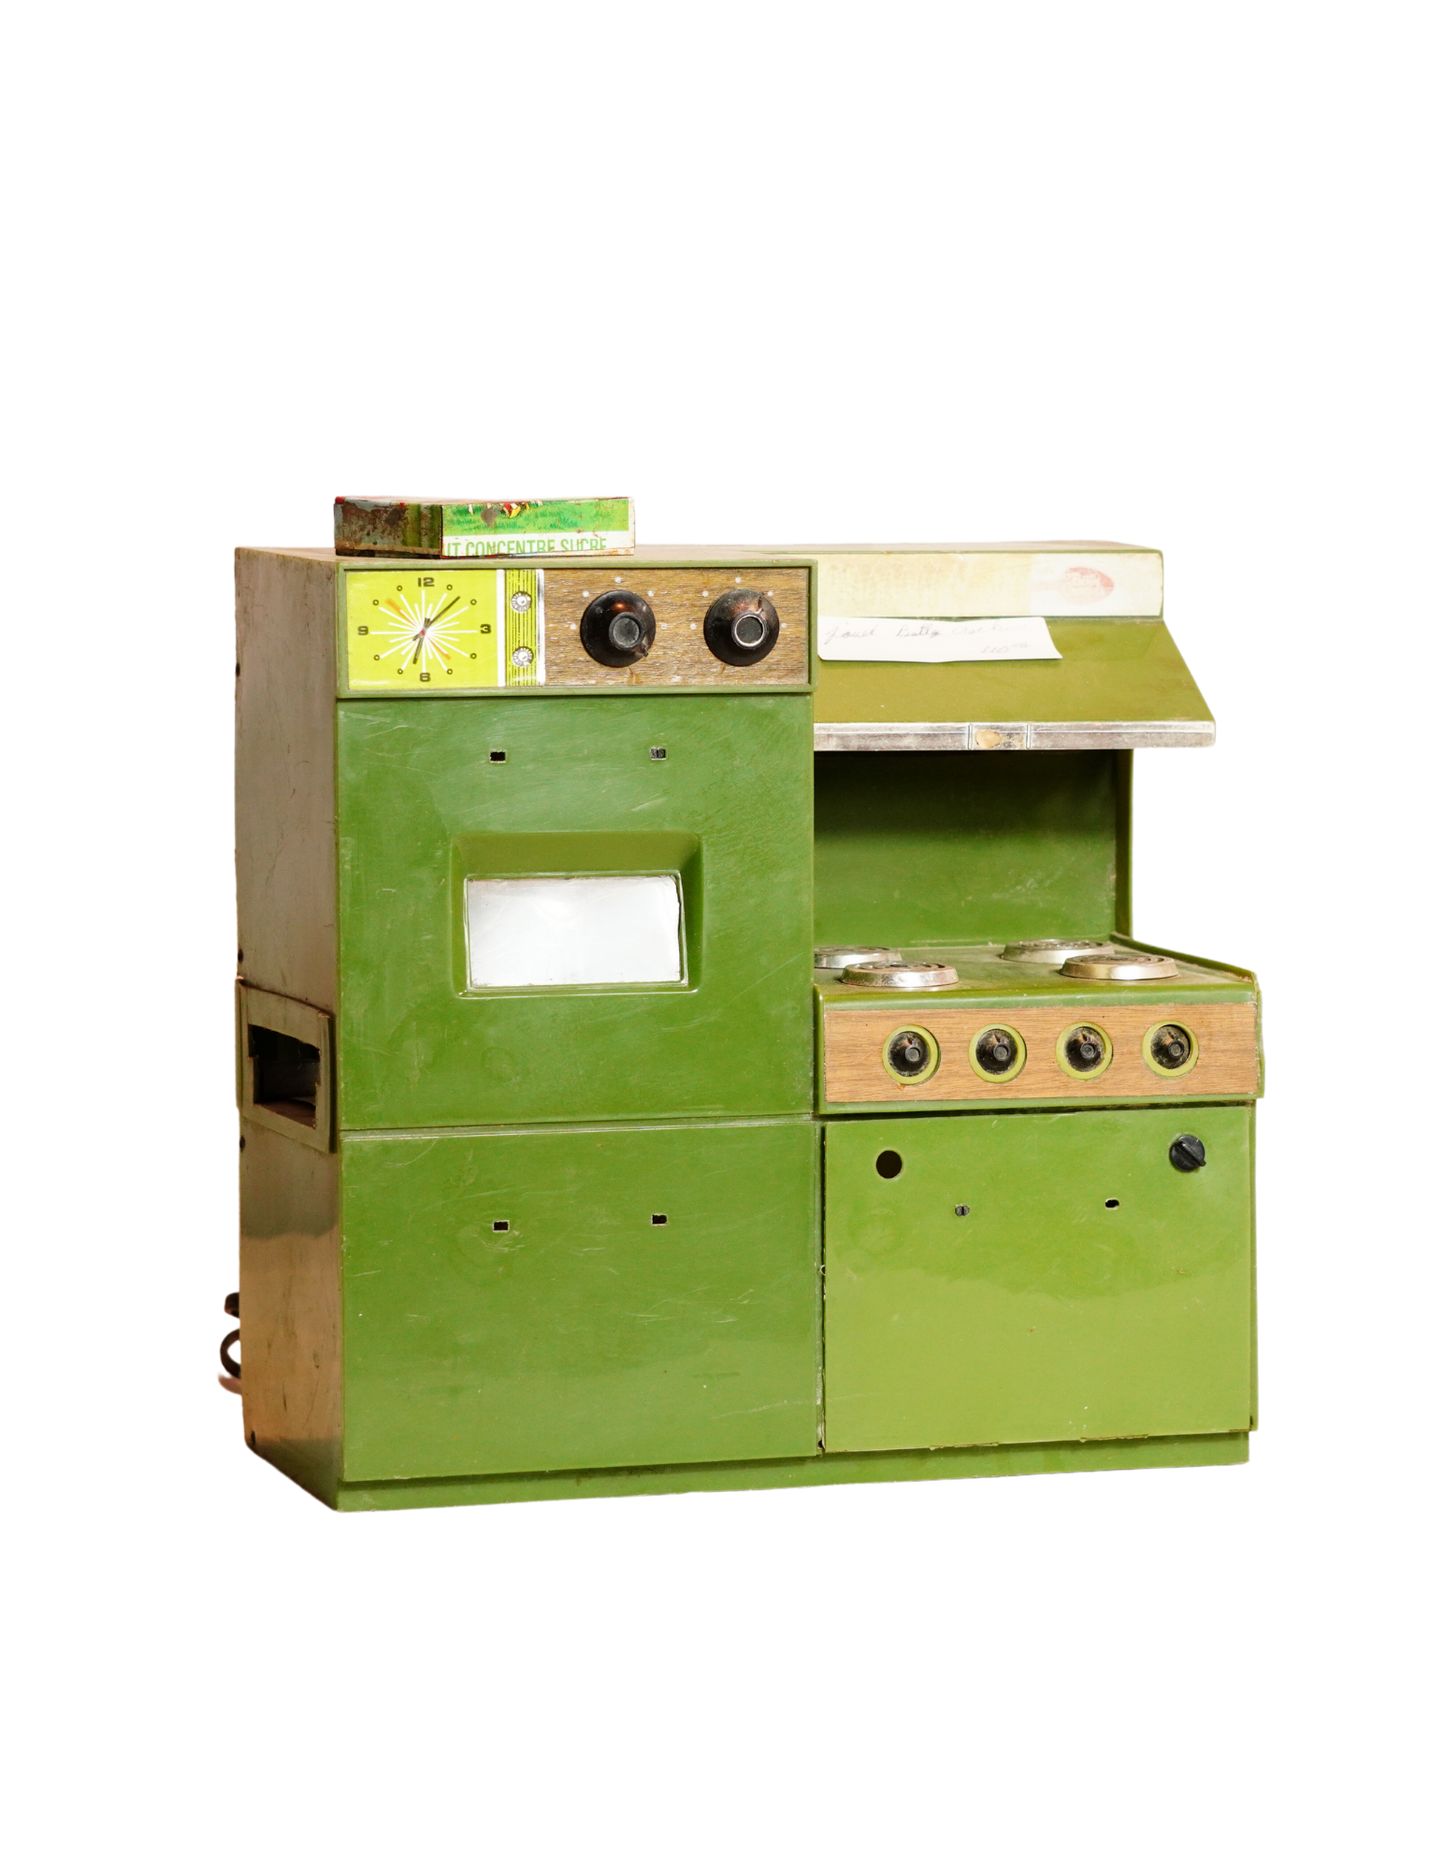 Toy cake oven, 1970s